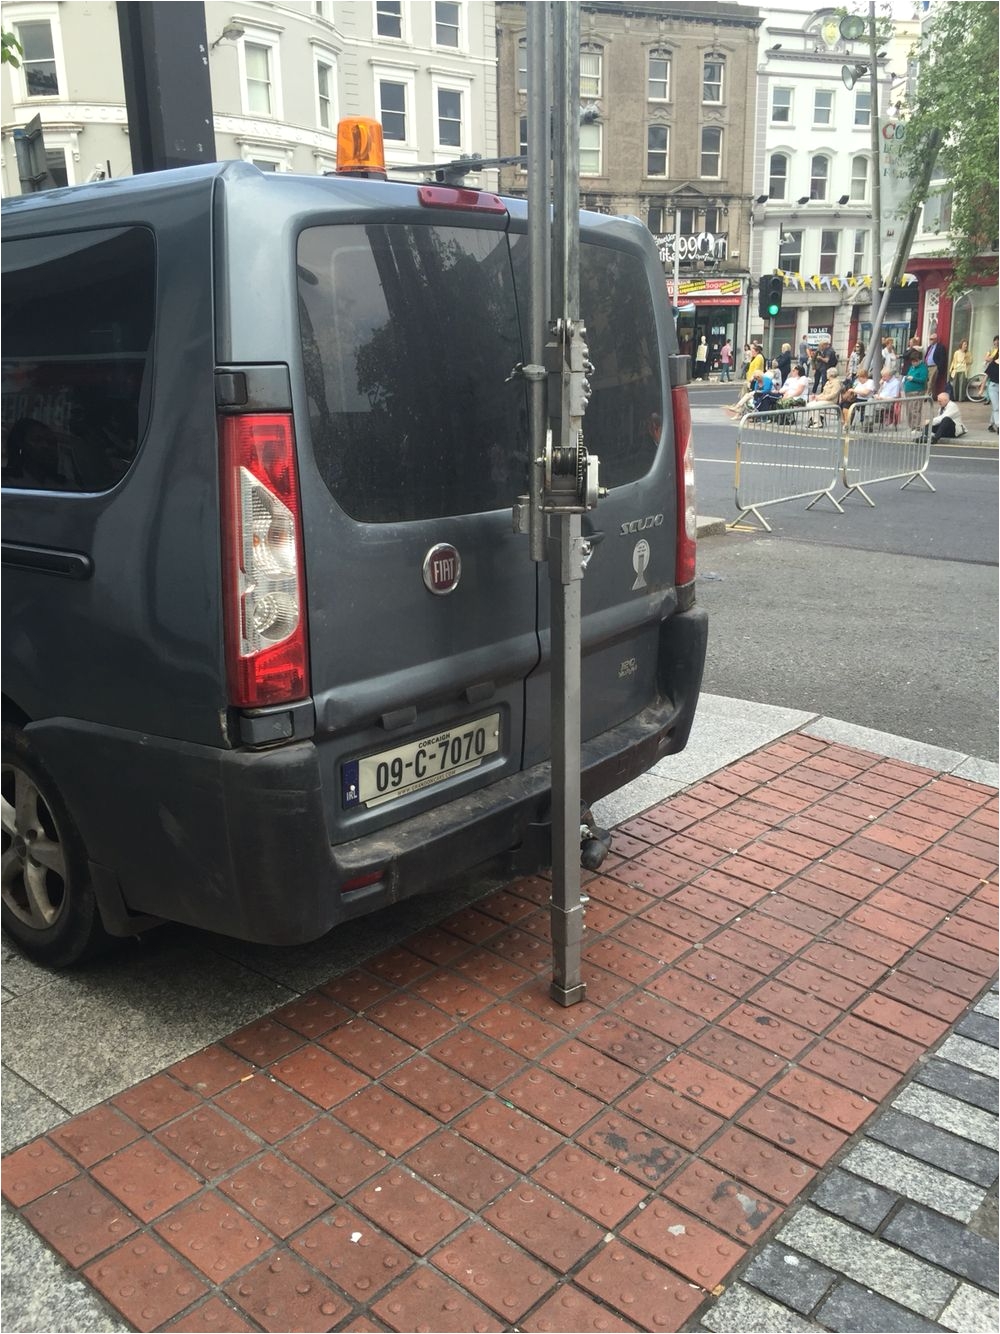 an idea for attaching a pull up bar to the back of the van